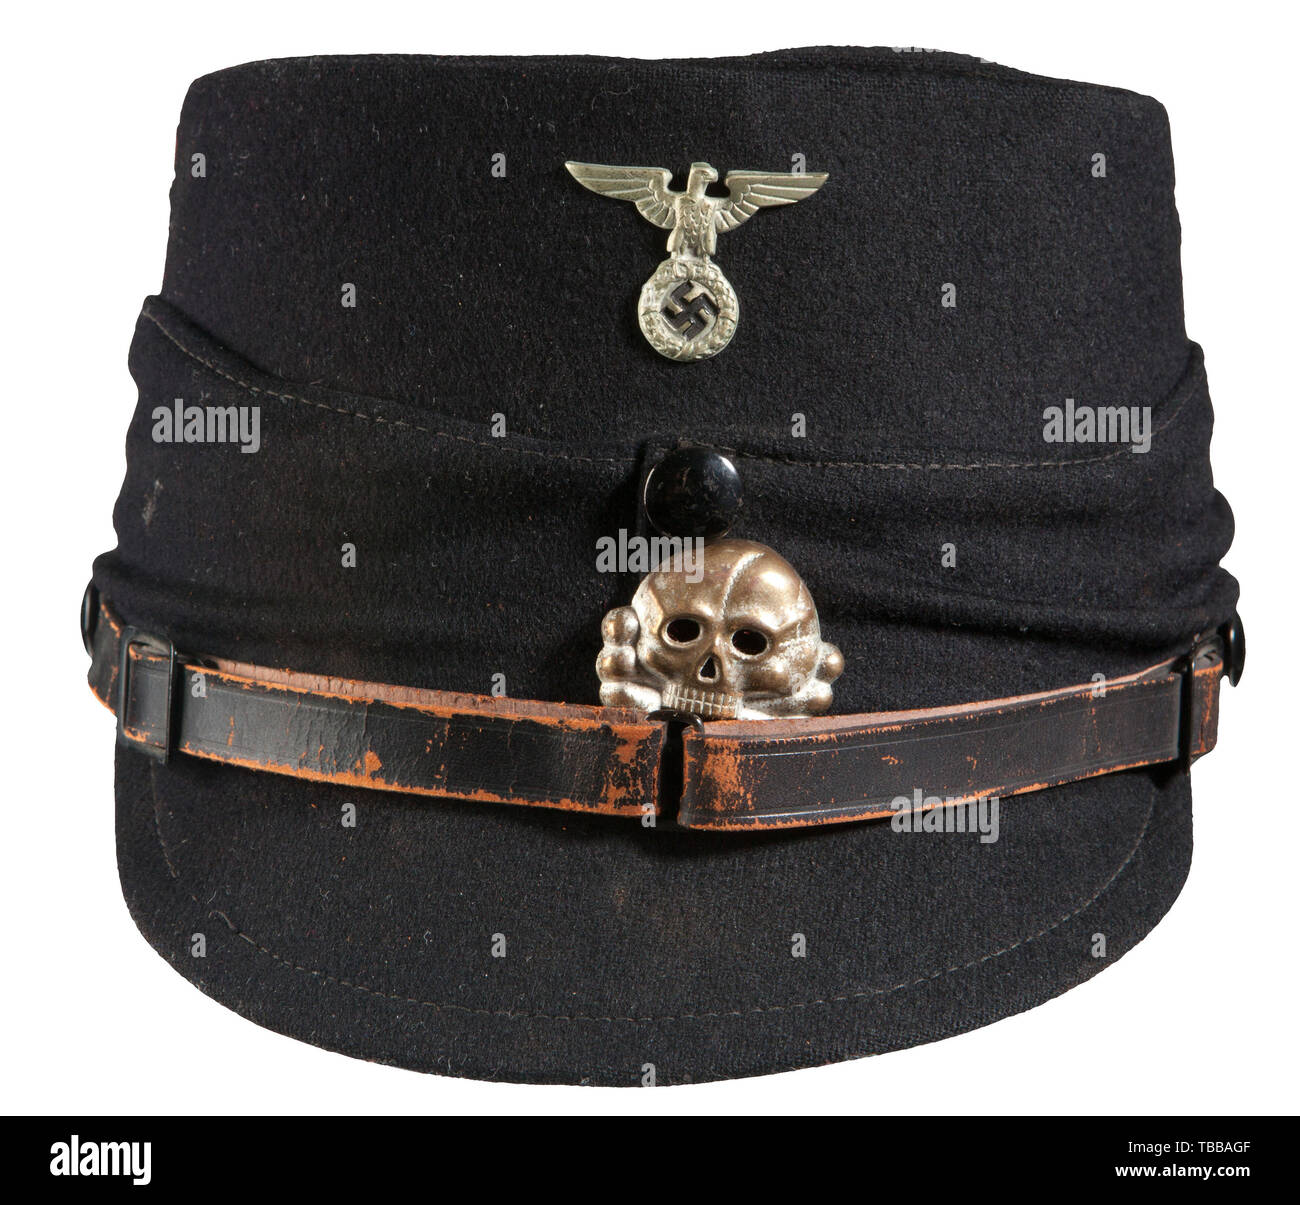 THE JOHN PEPERA COLLECTION, A Kepi for NCO/EM of the Allgemeine SS, So-called 'Traditionsmütze' (tr. 'traditional cap'). Black wool body, band and visor, early, silvered cap insignia (skull attachment prongs missing), black leather, three piece chinstrap. Black linen lining with imprinted golden SS runes in a circle on intact moisture shield. Heavily damaged and missing leather sweatband with RZM tag., Editorial-Use-Only Stock Photo